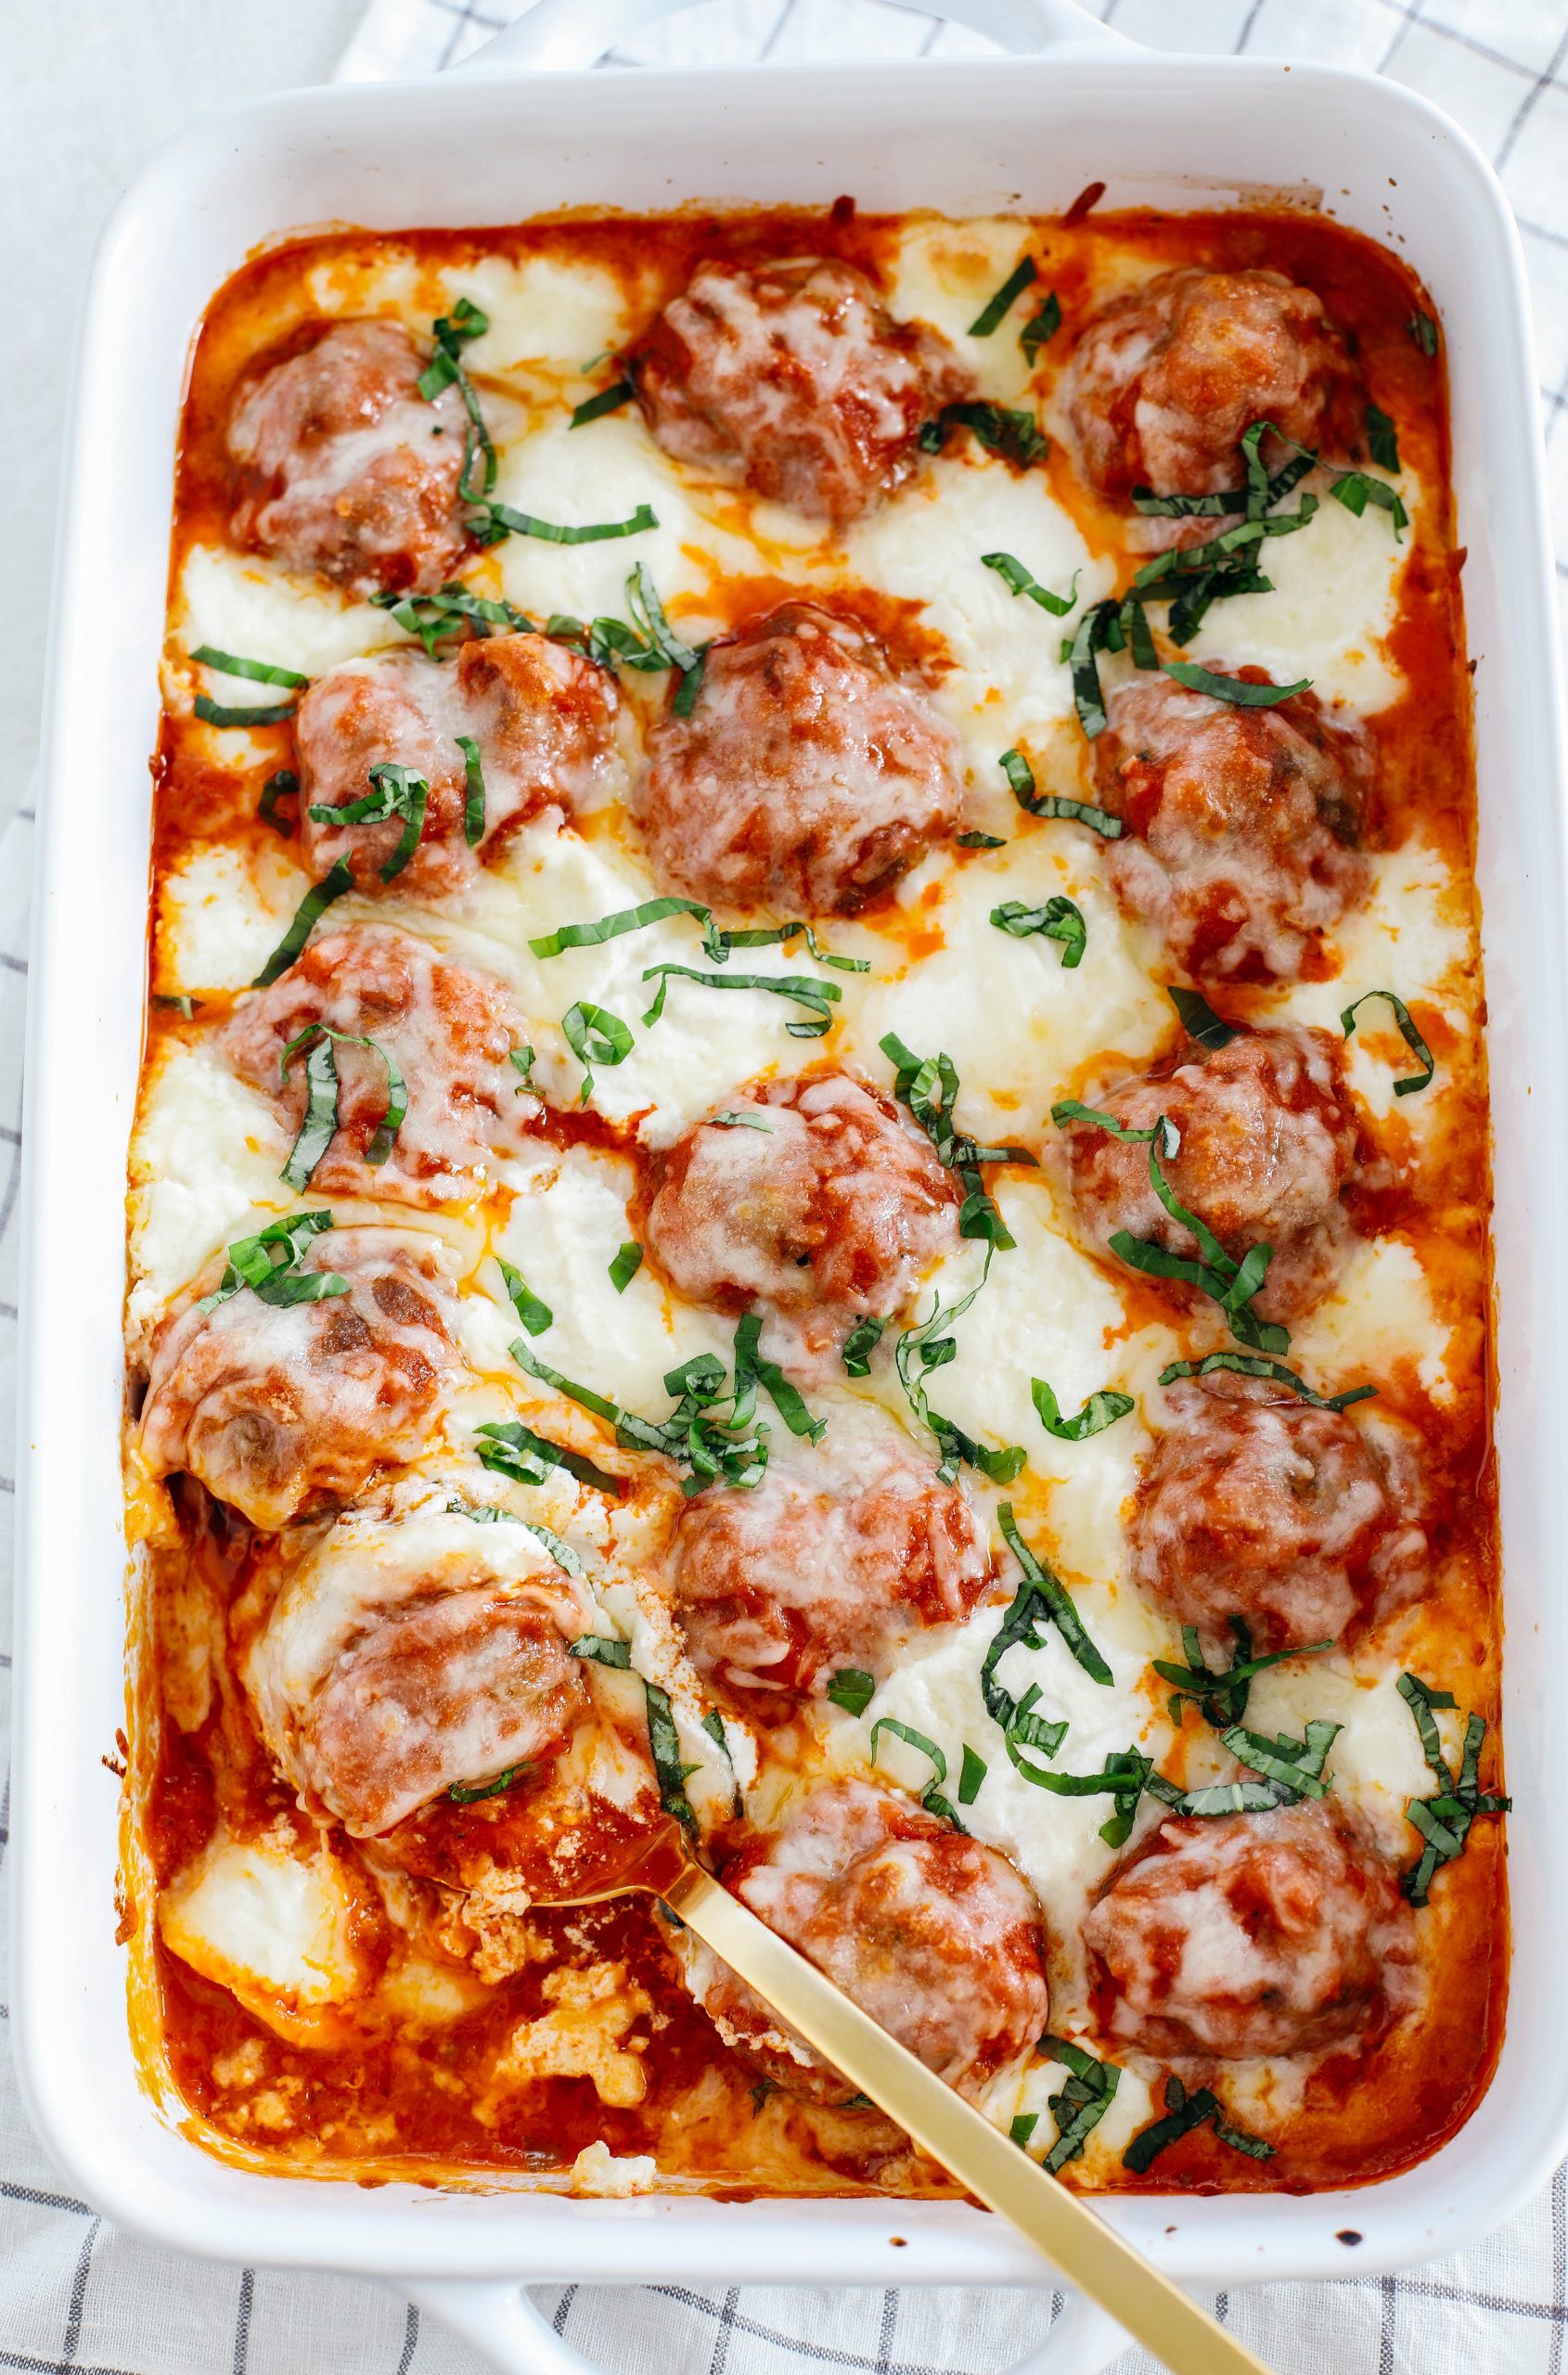 This Cheesy Keto Meatball Casserole is delicious and super filling with homemade meatballs topped with creamy ricotta cheese, mozzarella and parmesan for the perfect low carb meal your whole family will enjoy!